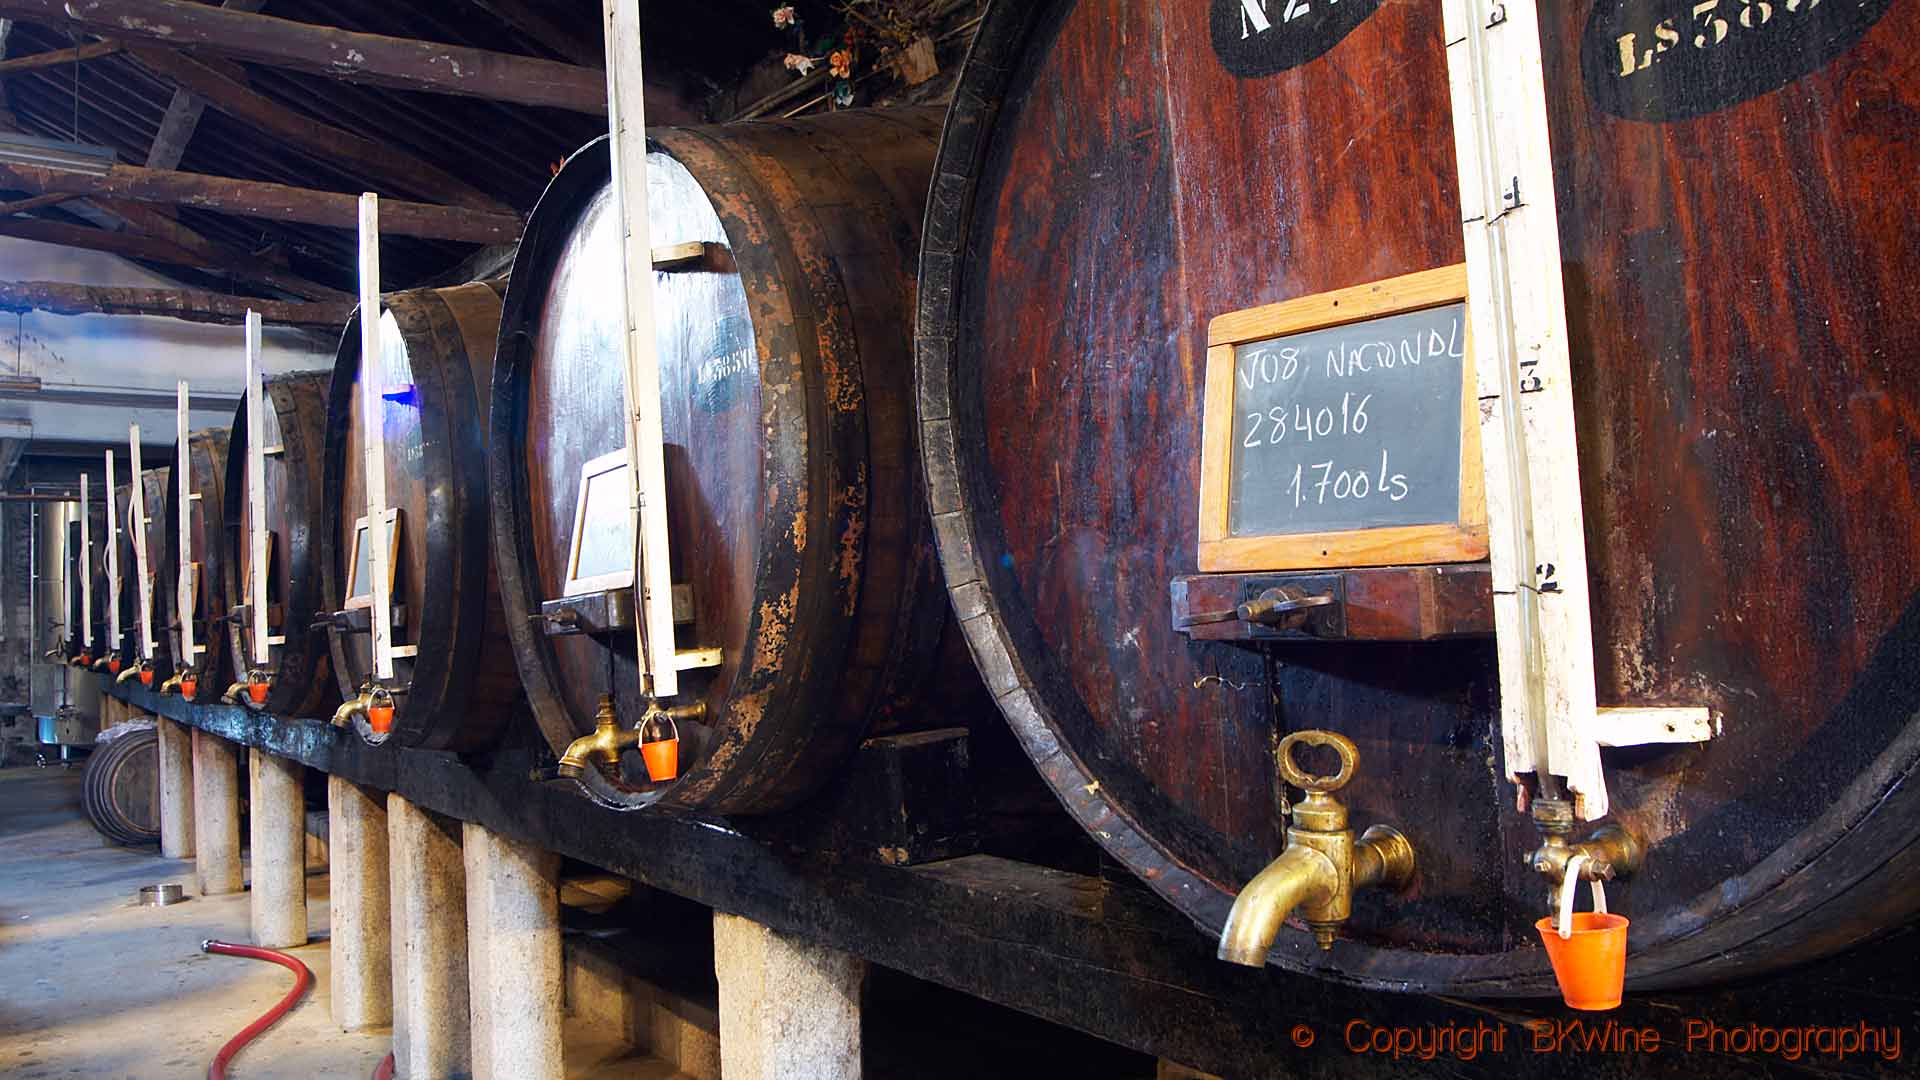 Big old oak vats in a wine cellar in the Douro Valley